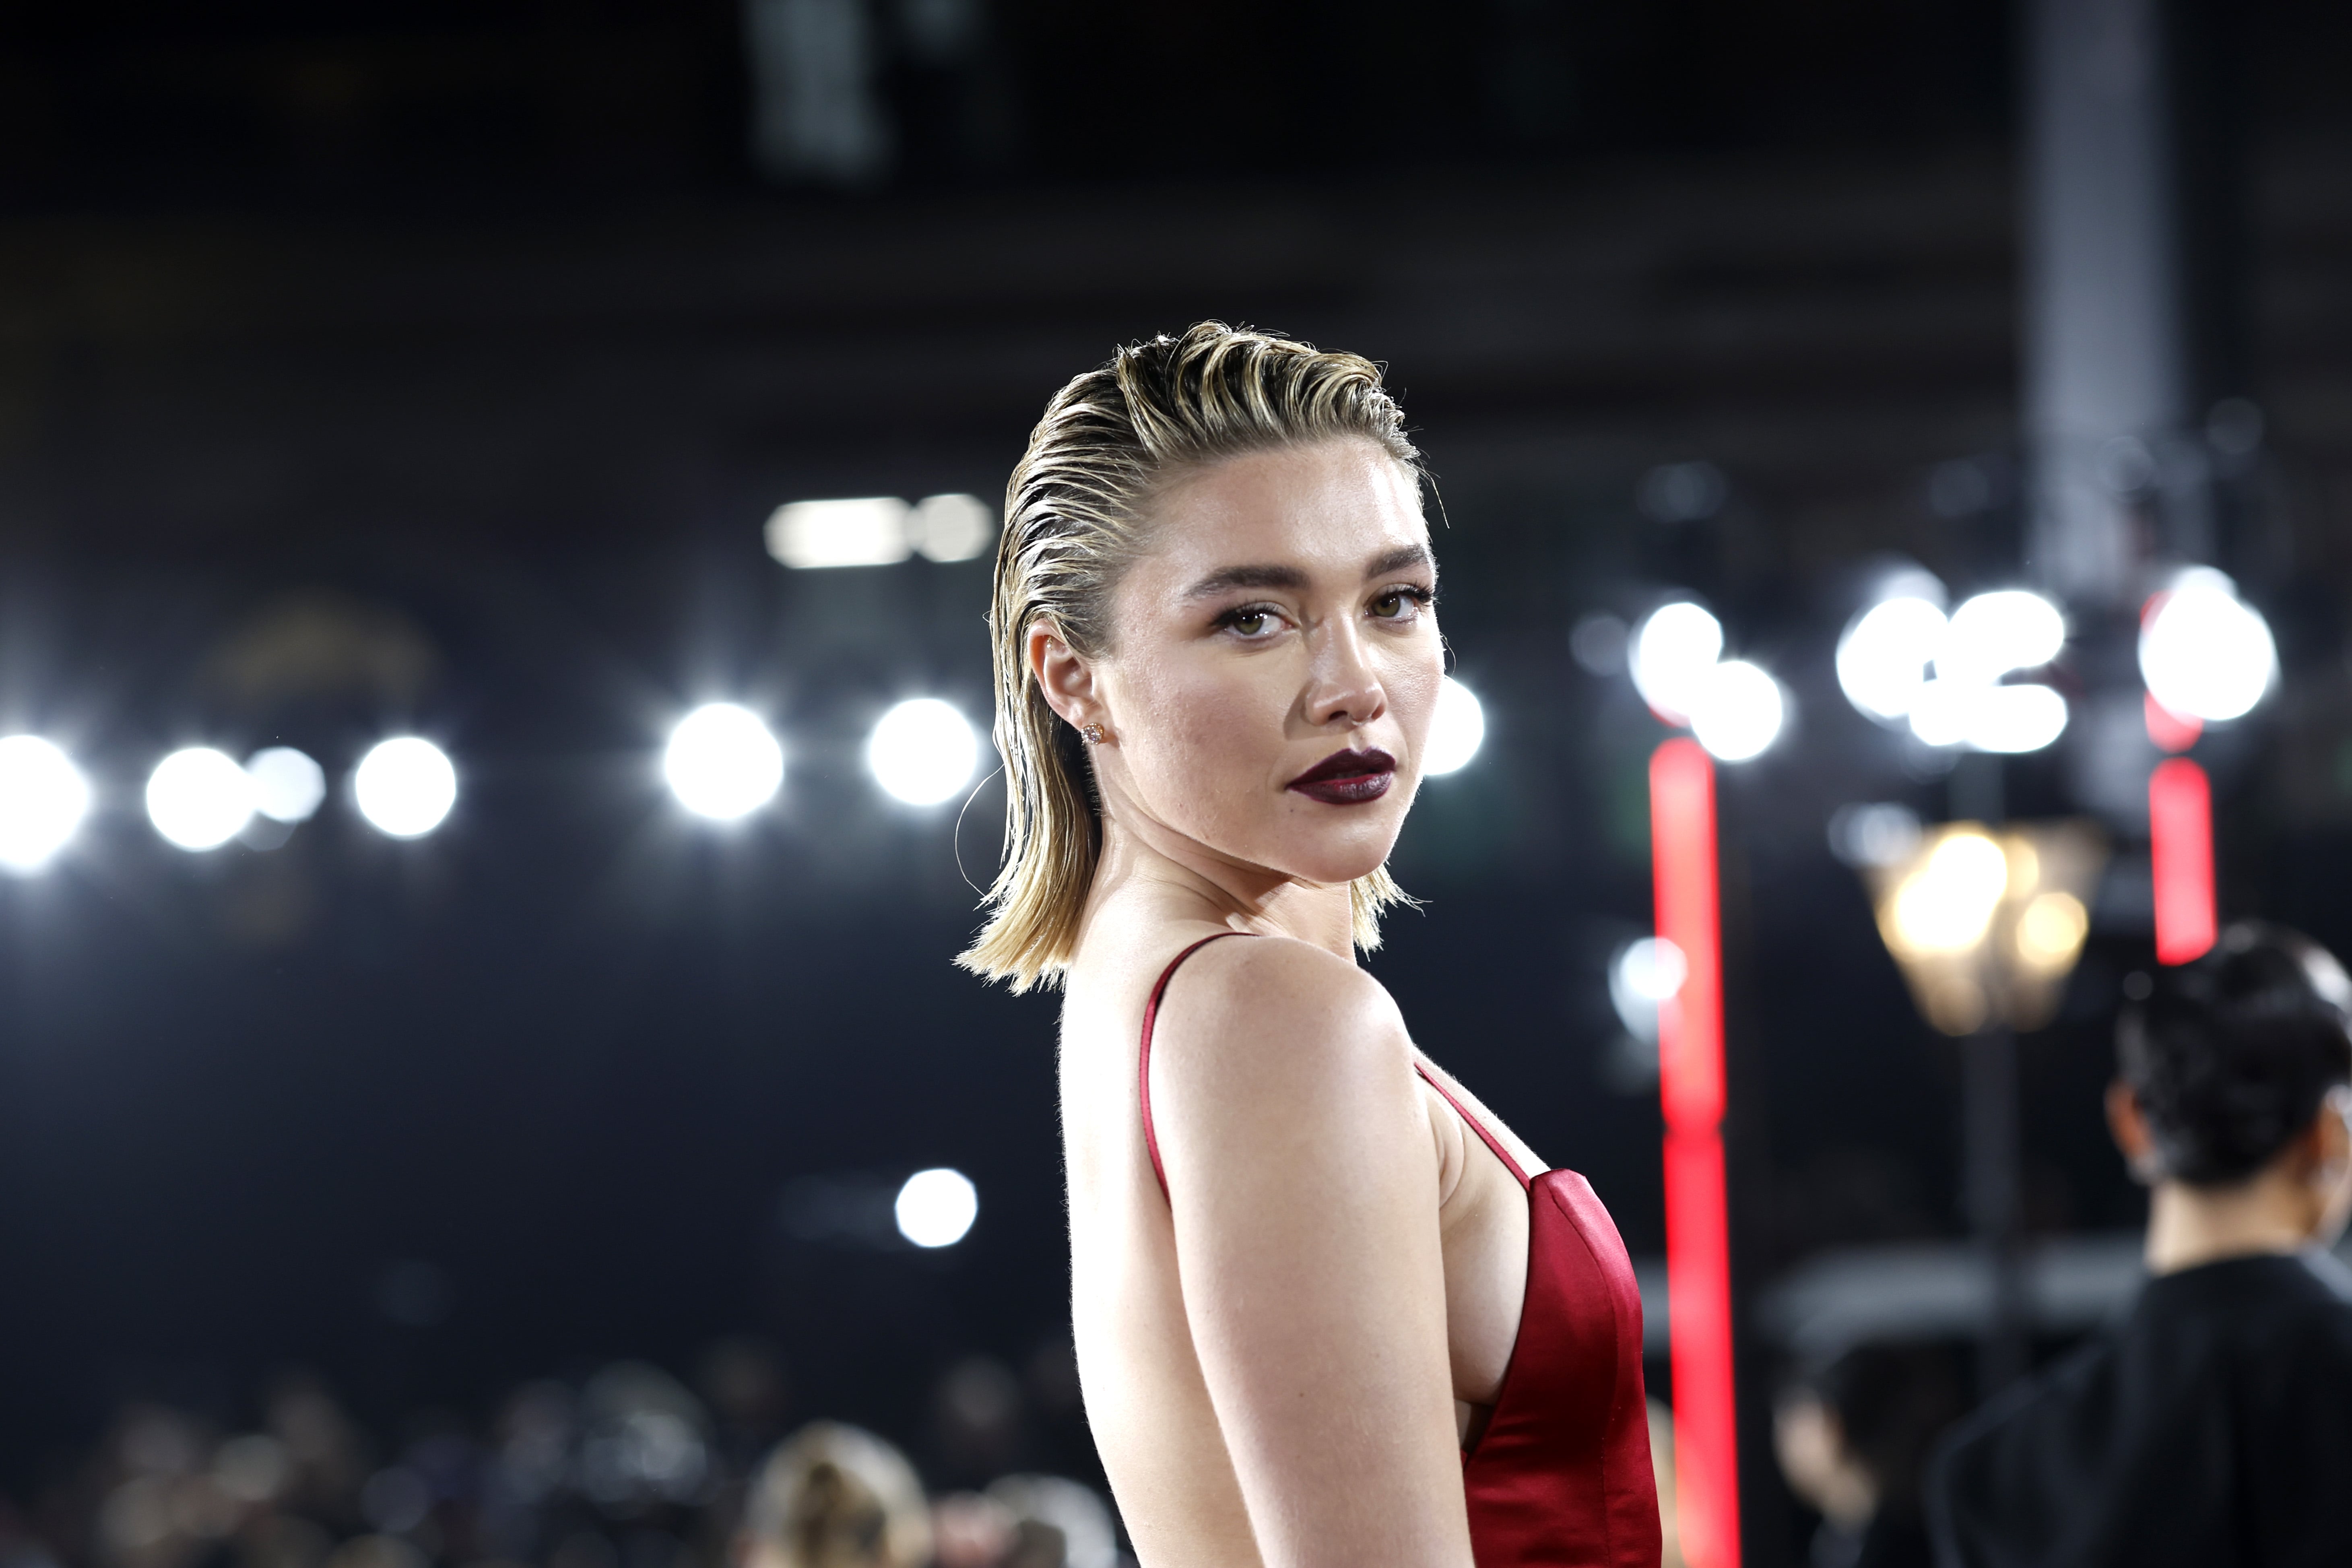 Florence Pugh is Vogue's Winter Cover Star: How She Became